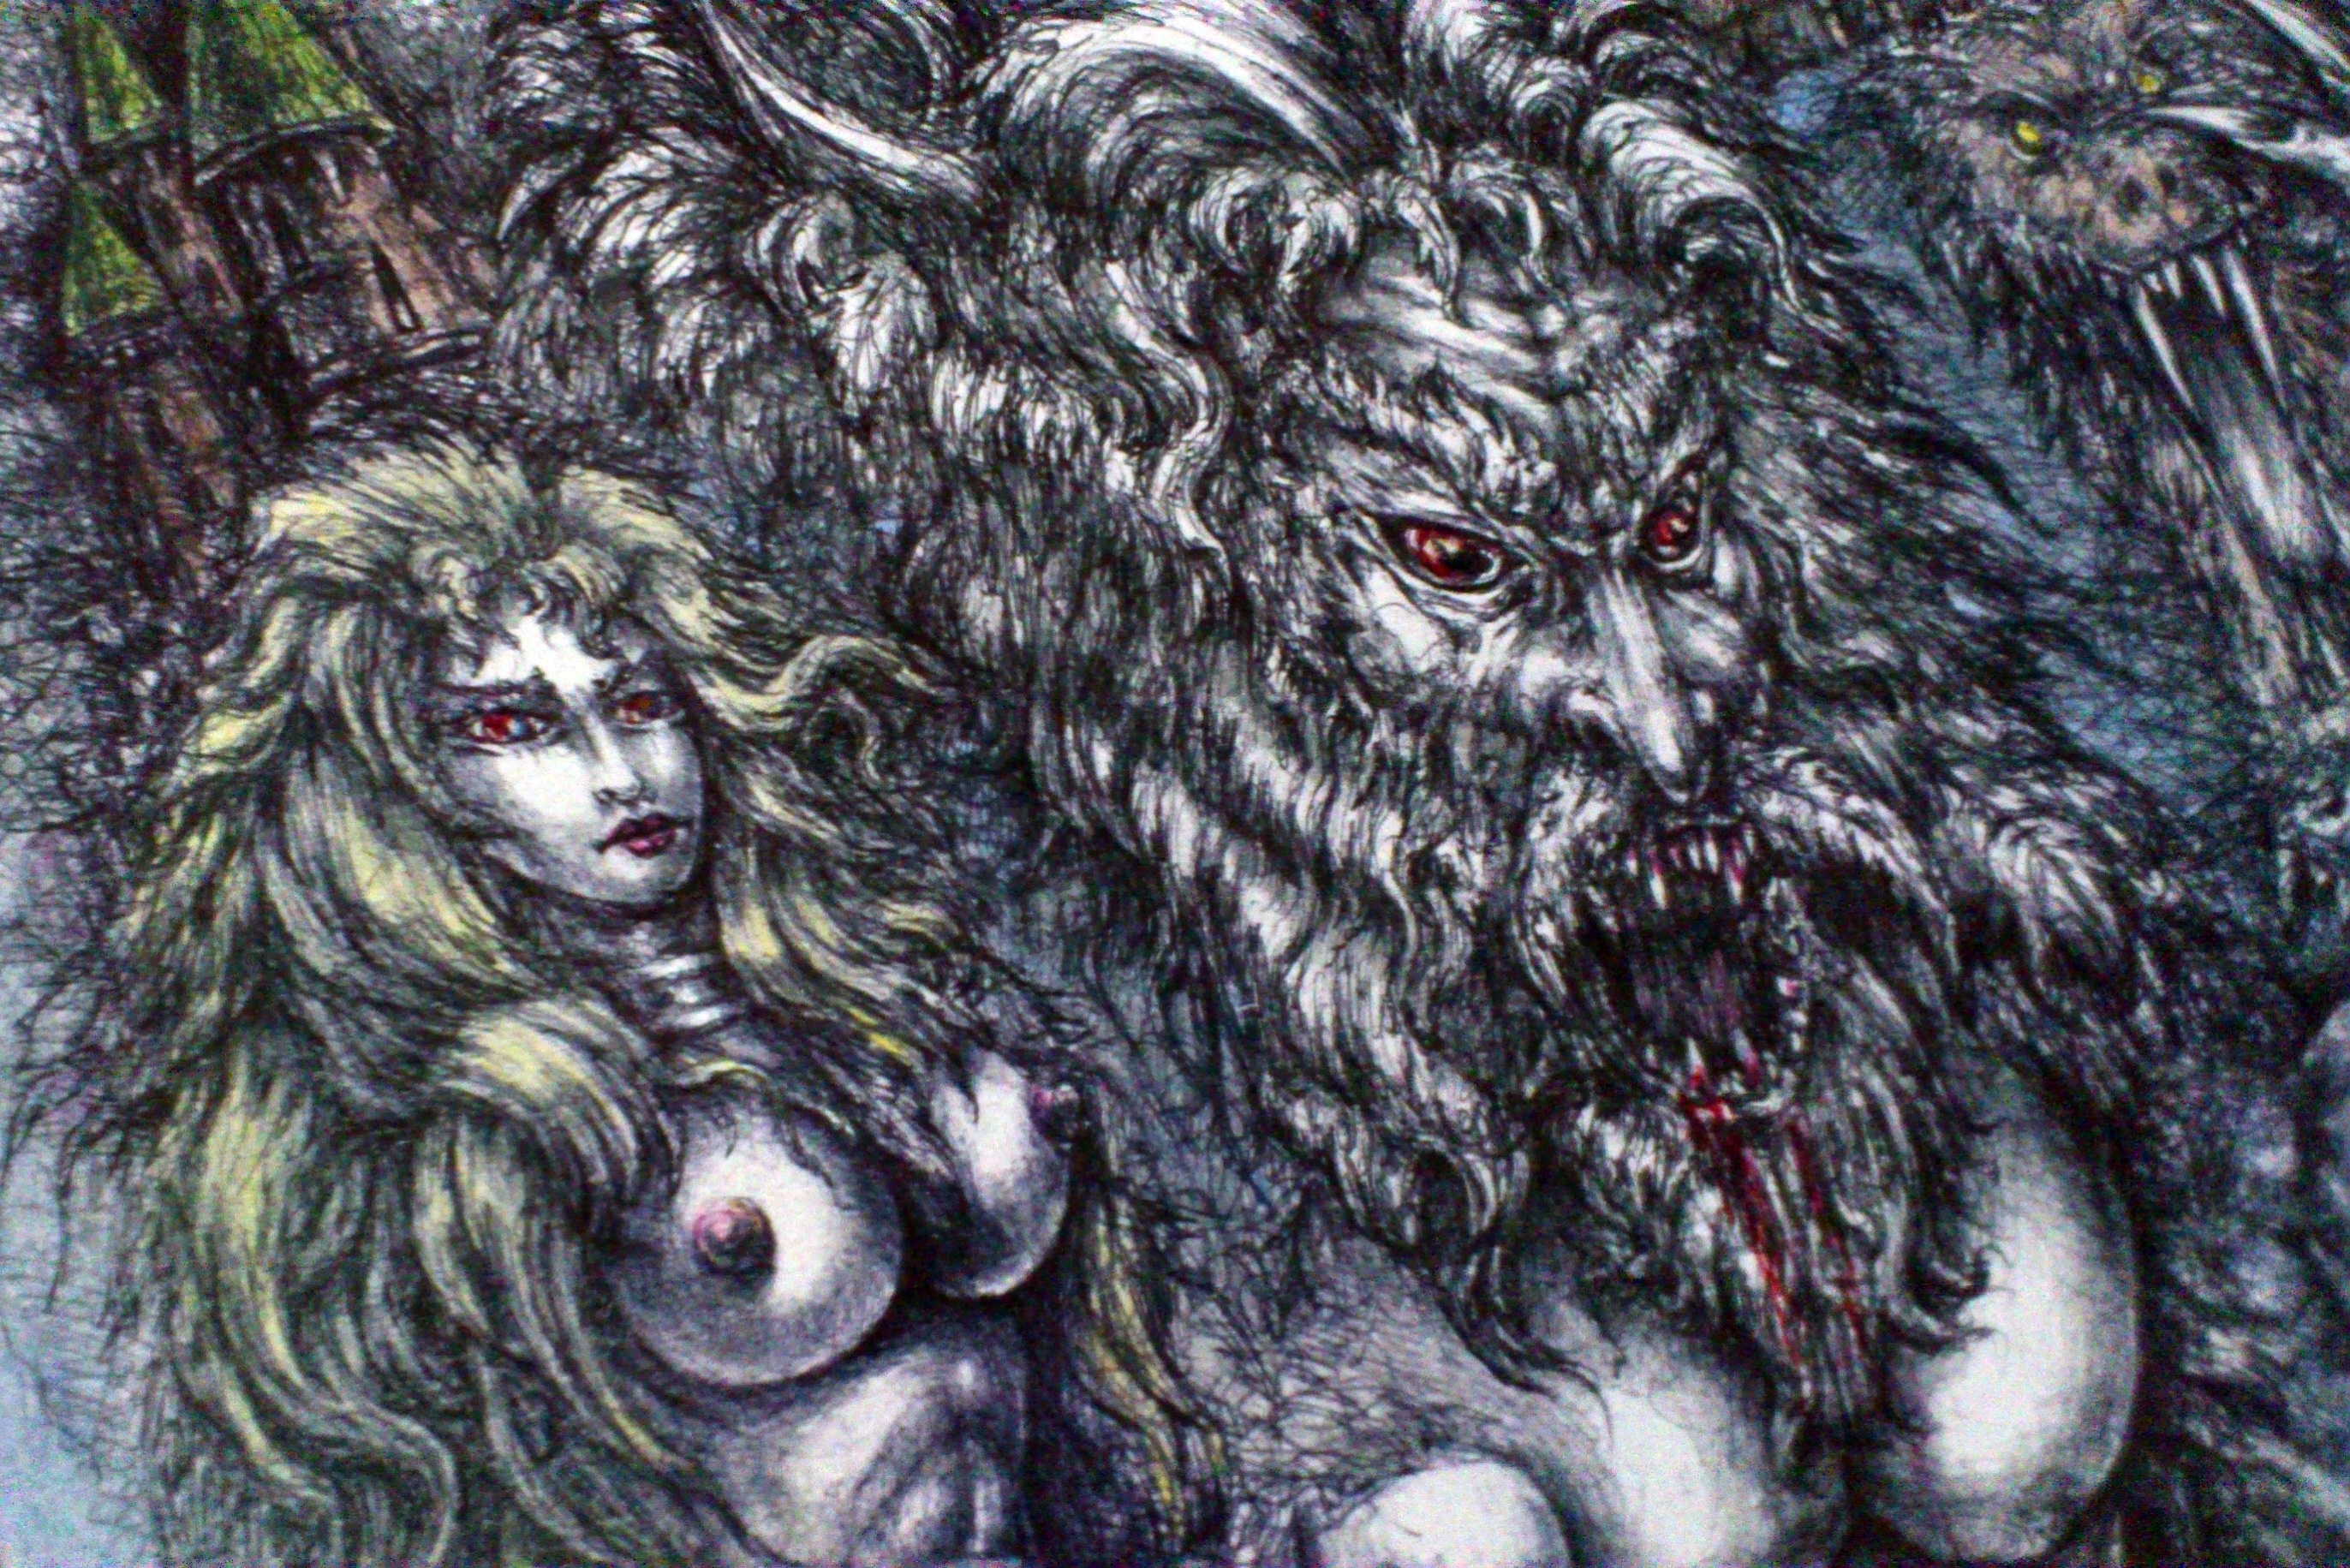 Angel Piangelo : 'RIDING HOOD AND THE WOLF', 2016 Mixed Media, Fantasy. PAINTING DRAWING - mixed Technique - Permanent, as permanent black pens were used for the main Drawing - FANTASY DARK HORROR - inspired from the medieval Mythology the Fairy Tales of Grimm Brothers - Original Angel P.  Artwork 2016 - a black wooden Frame is included, which means that the Artwork is ready for the wall - ...